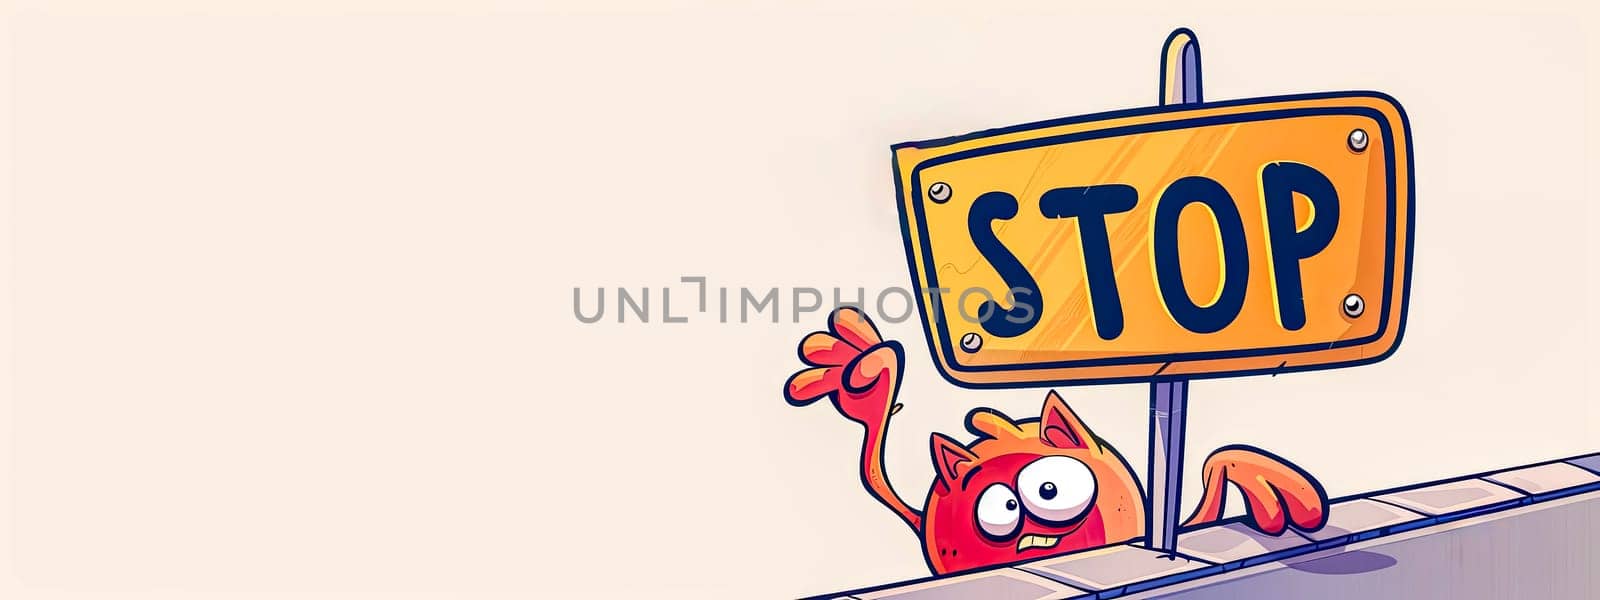 Playful red monster cartoon character peeking and holding a stop sign on a light background